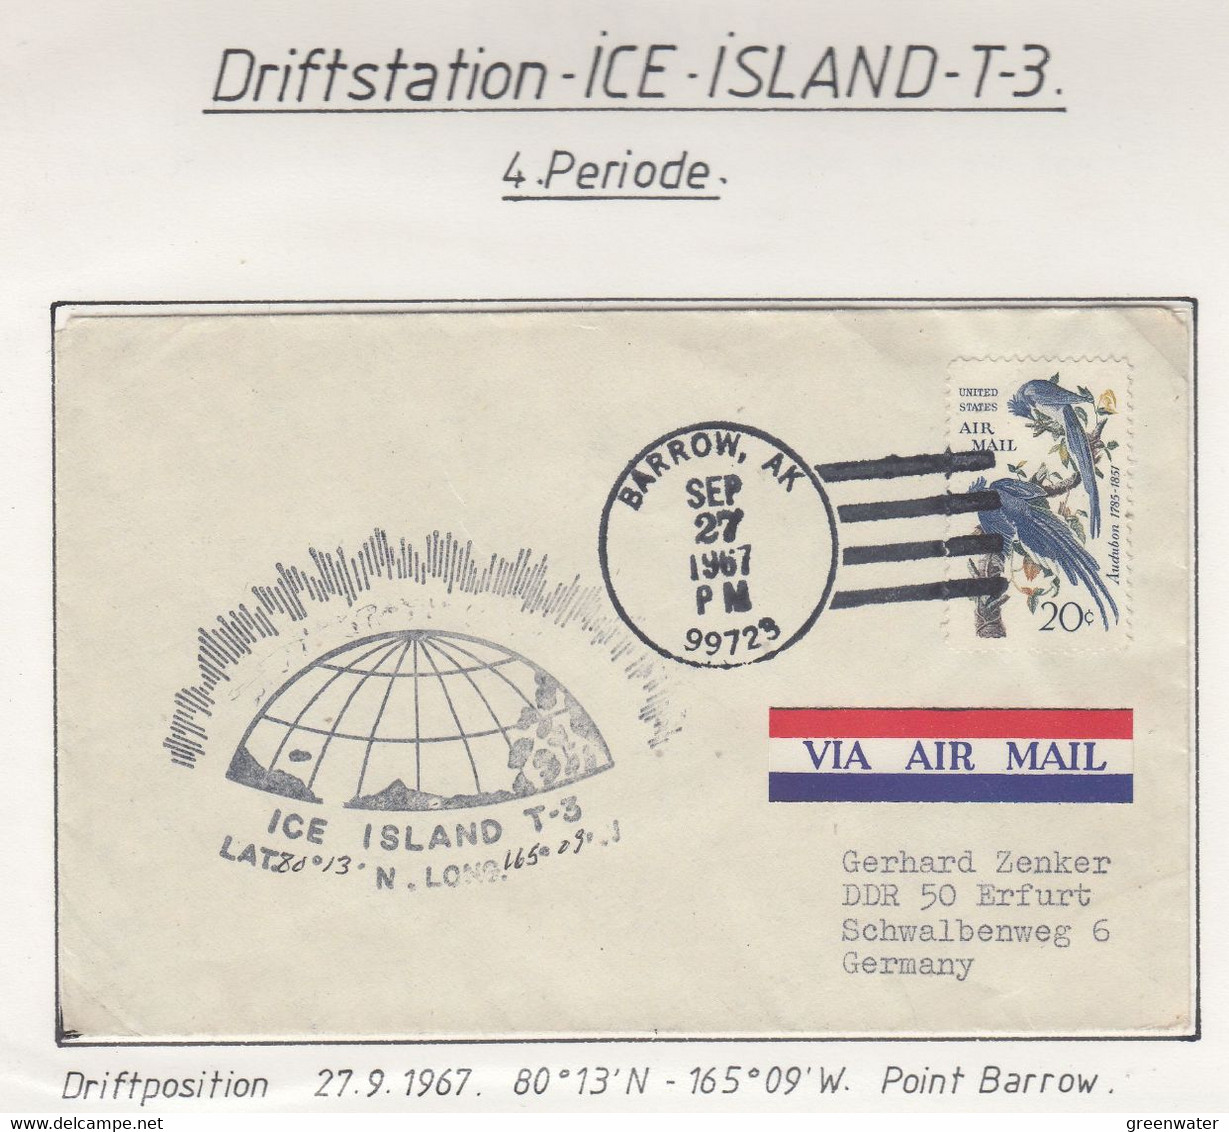 USA Driftstation ICE-ISLAND T-3 Cover Ca  Ice Island T-3 Periode 4 Ca Sep 27 1967  (DR124) - Scientific Stations & Arctic Drifting Stations